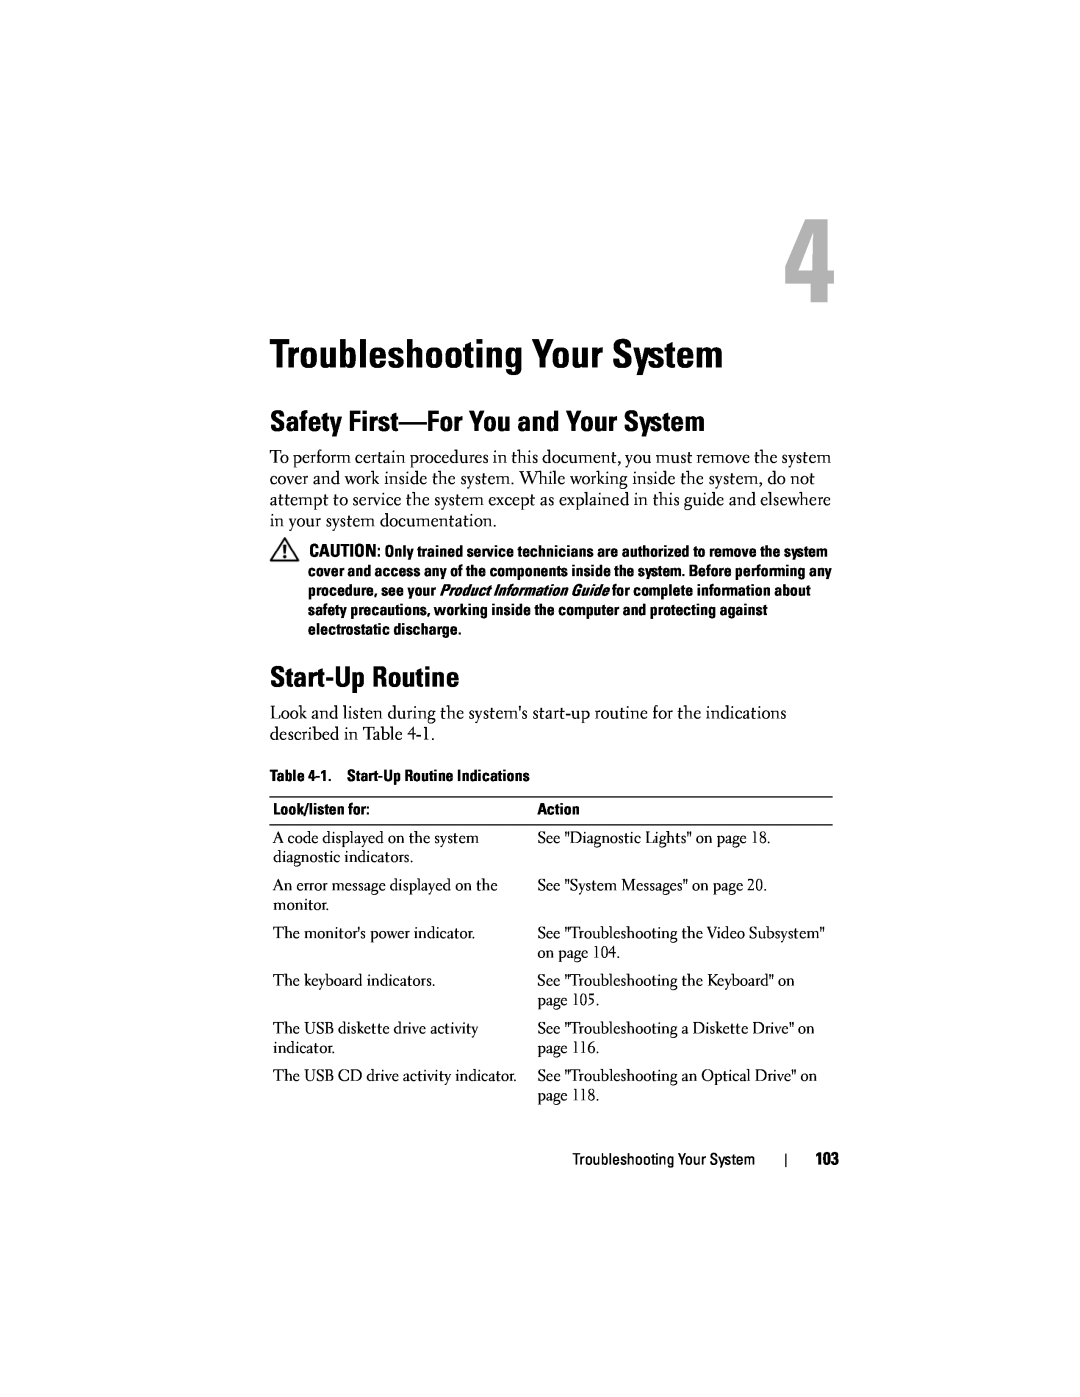 Dell T105 owner manual Troubleshooting Your System, Safety First-For You and Your System, Start-Up Routine 